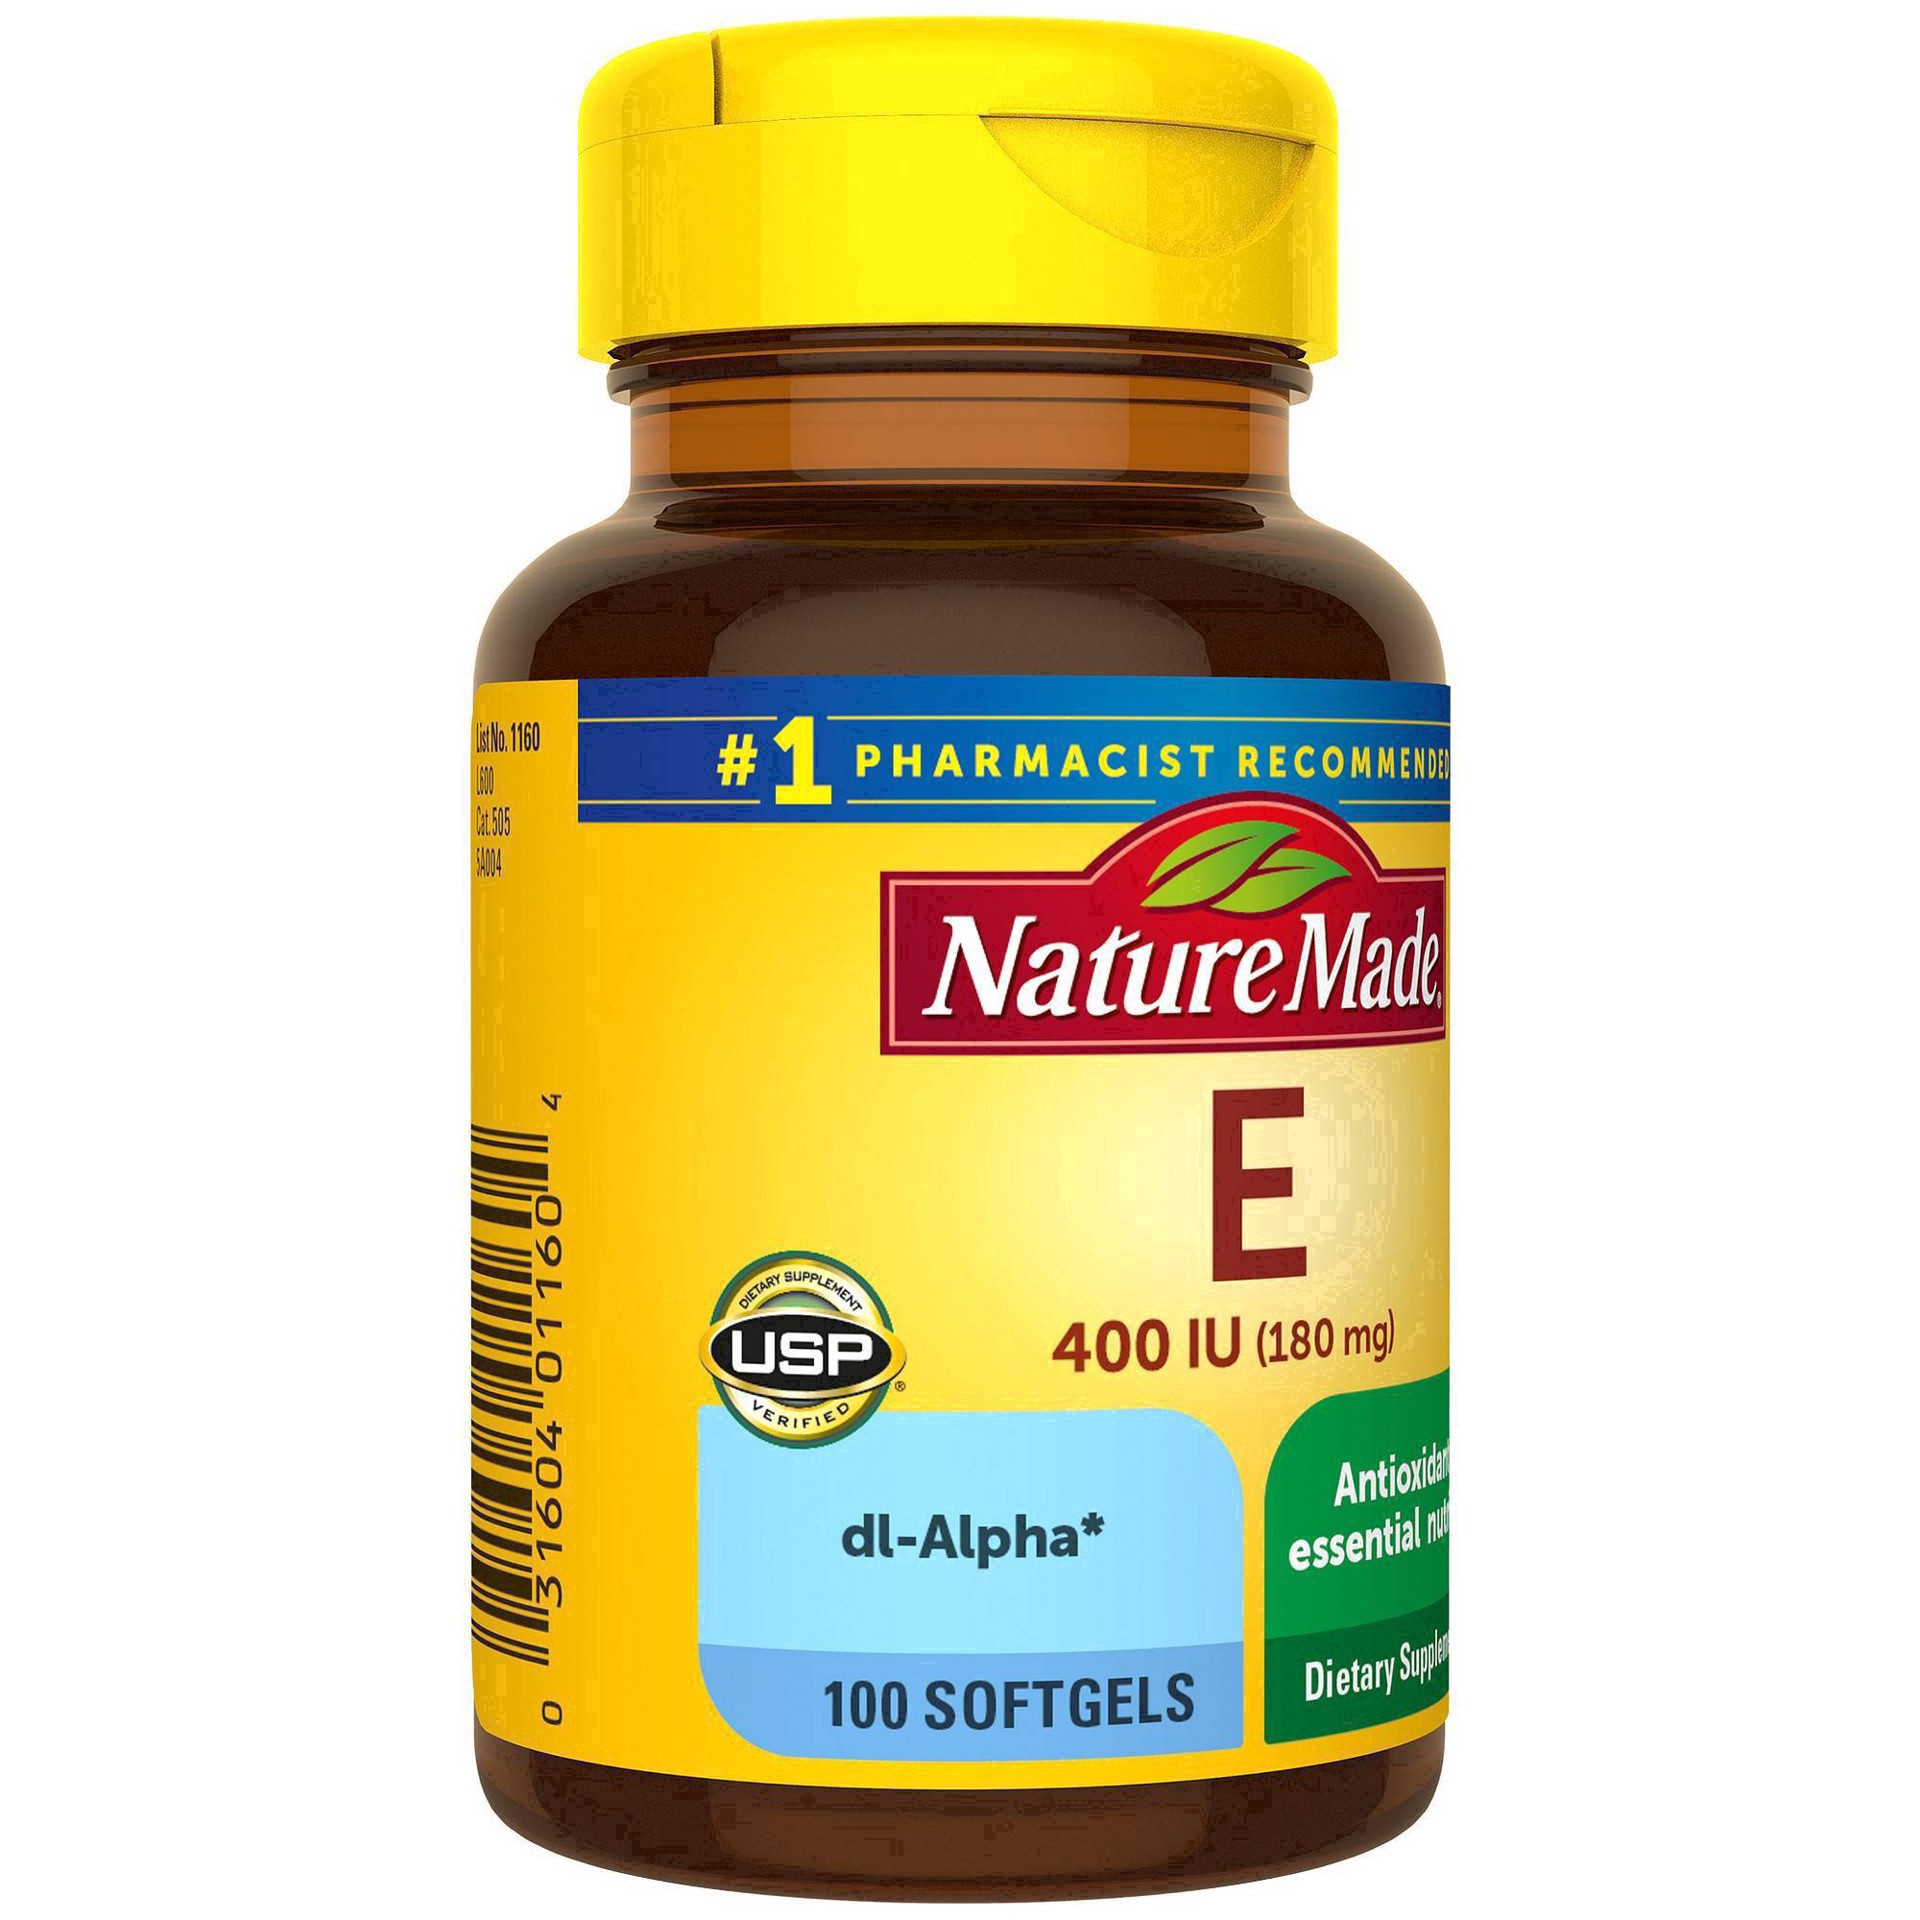 slide 57 of 74, Nature Made Vitamin E 180 mg (400 IU) dl-Alpha, Dietary Supplement for Antioxidant Support, 100 Softgels, 100 Day Supply, 100 ct